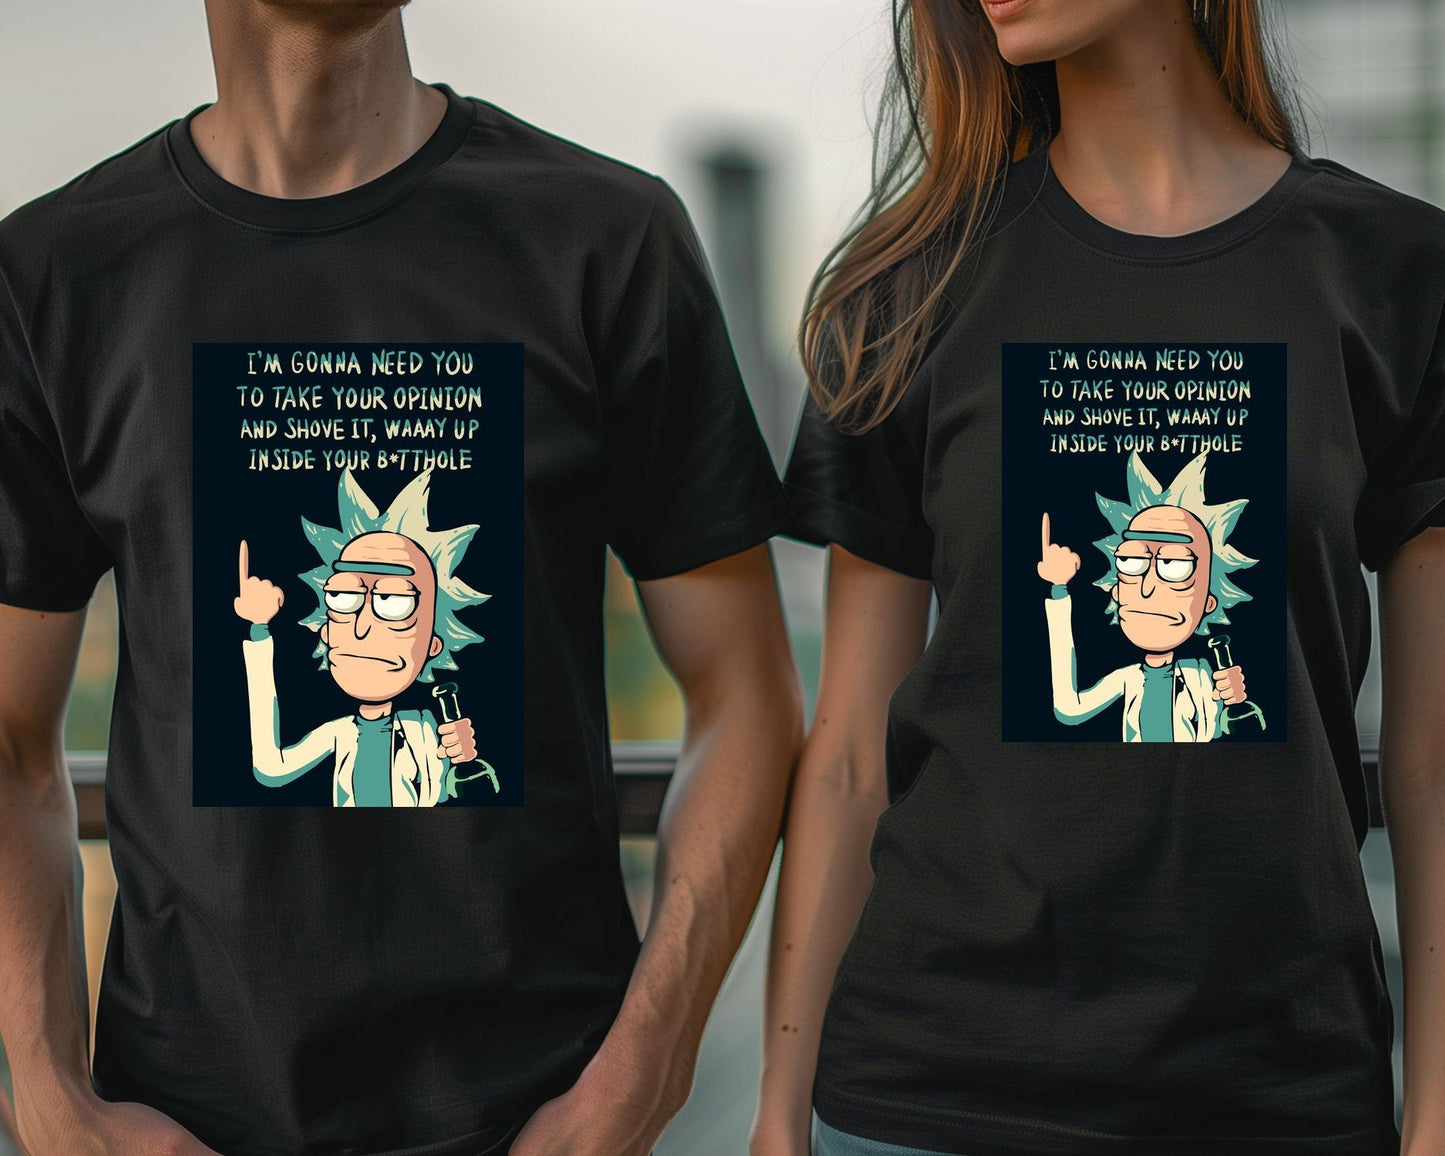 Rick and morty quotes 6 - @Yoho